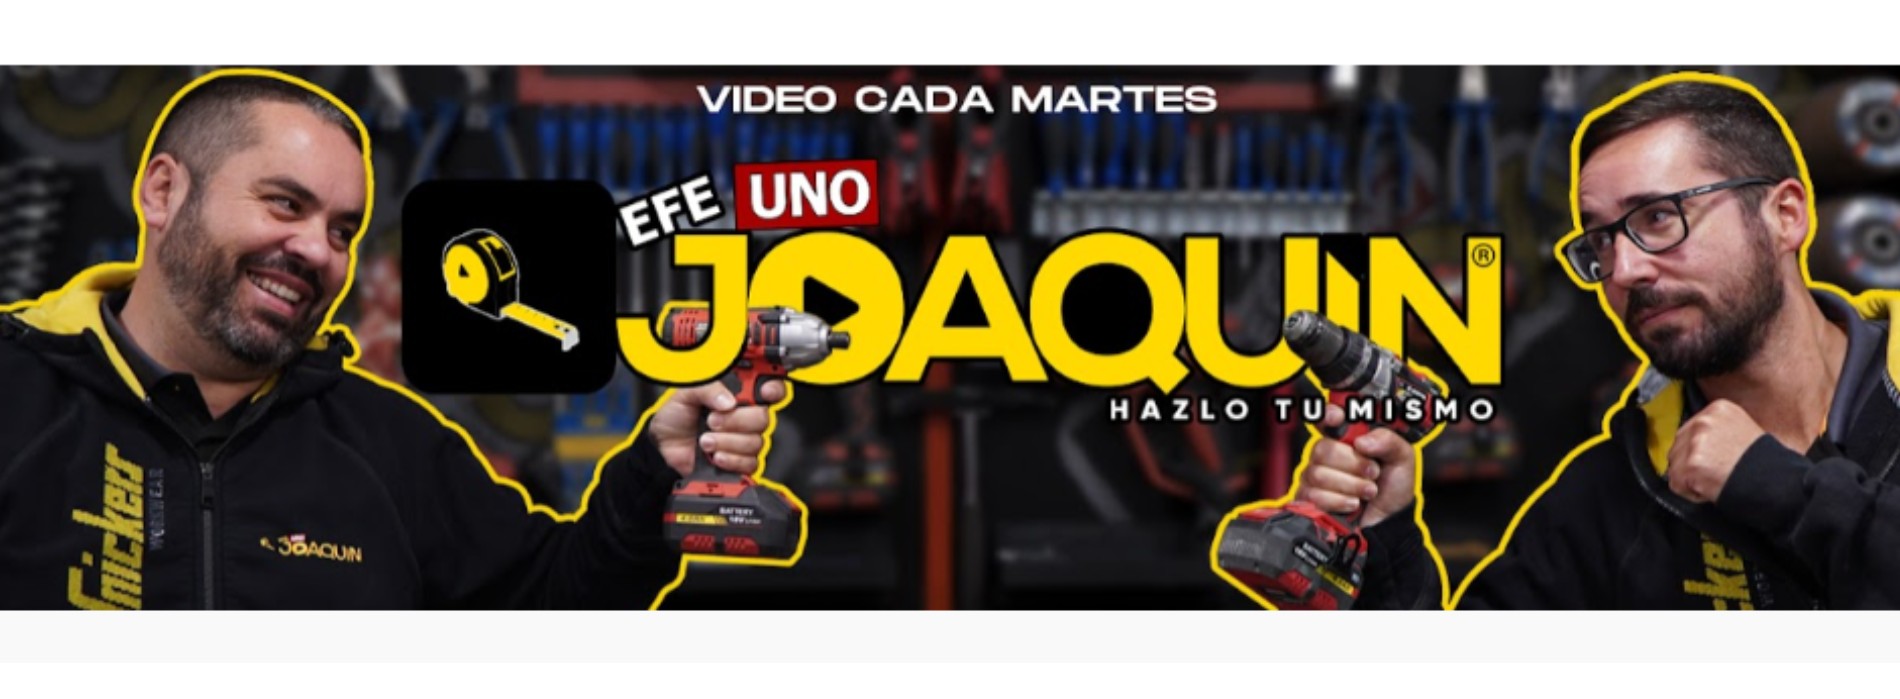 El Sabio joins forces with EFE UNO JOAQUÍN, the most famous DIY youtuber in Spain